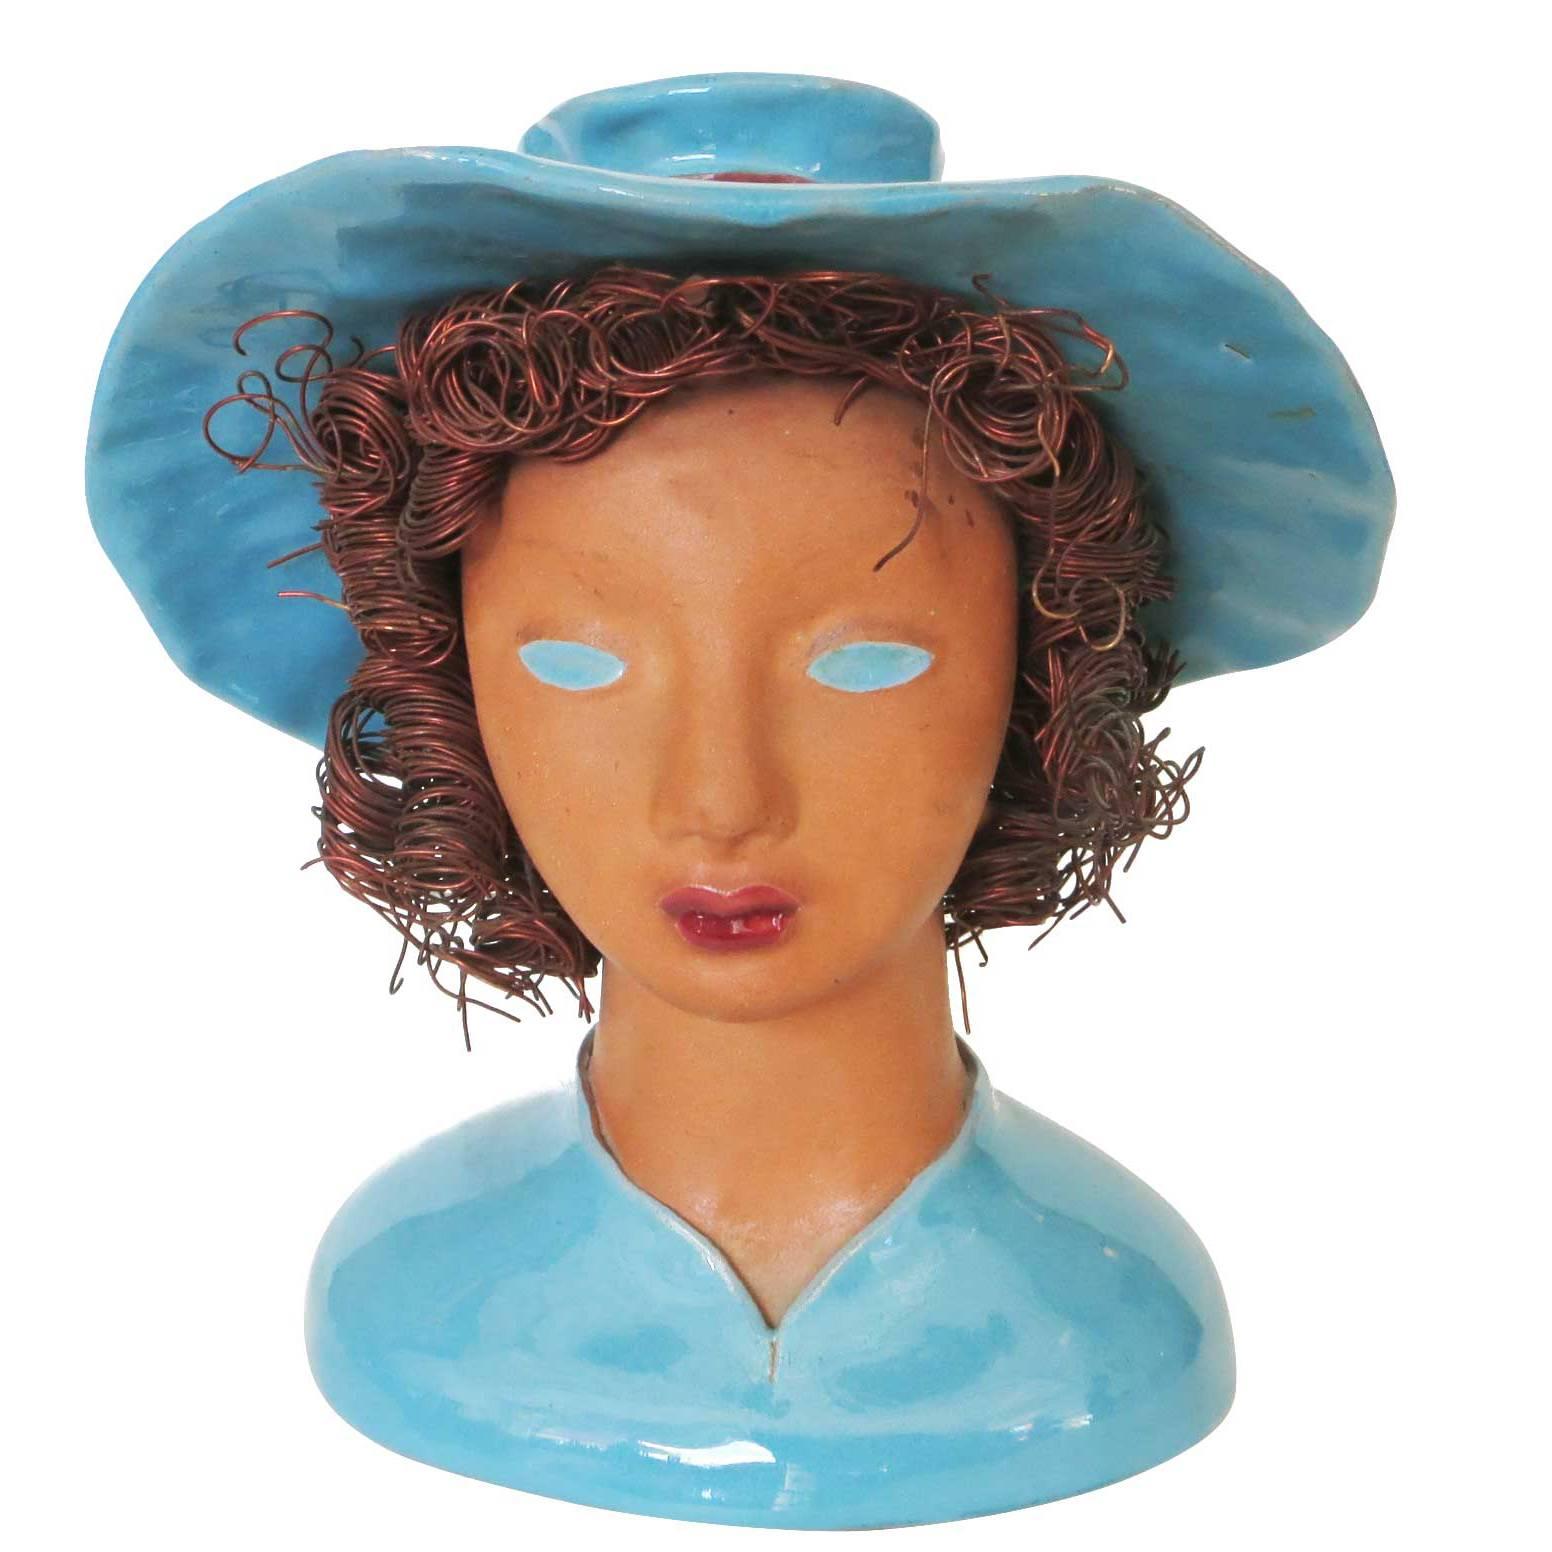 California Pottery "Becky" Bust with Copper Hair by Hermione Palmer